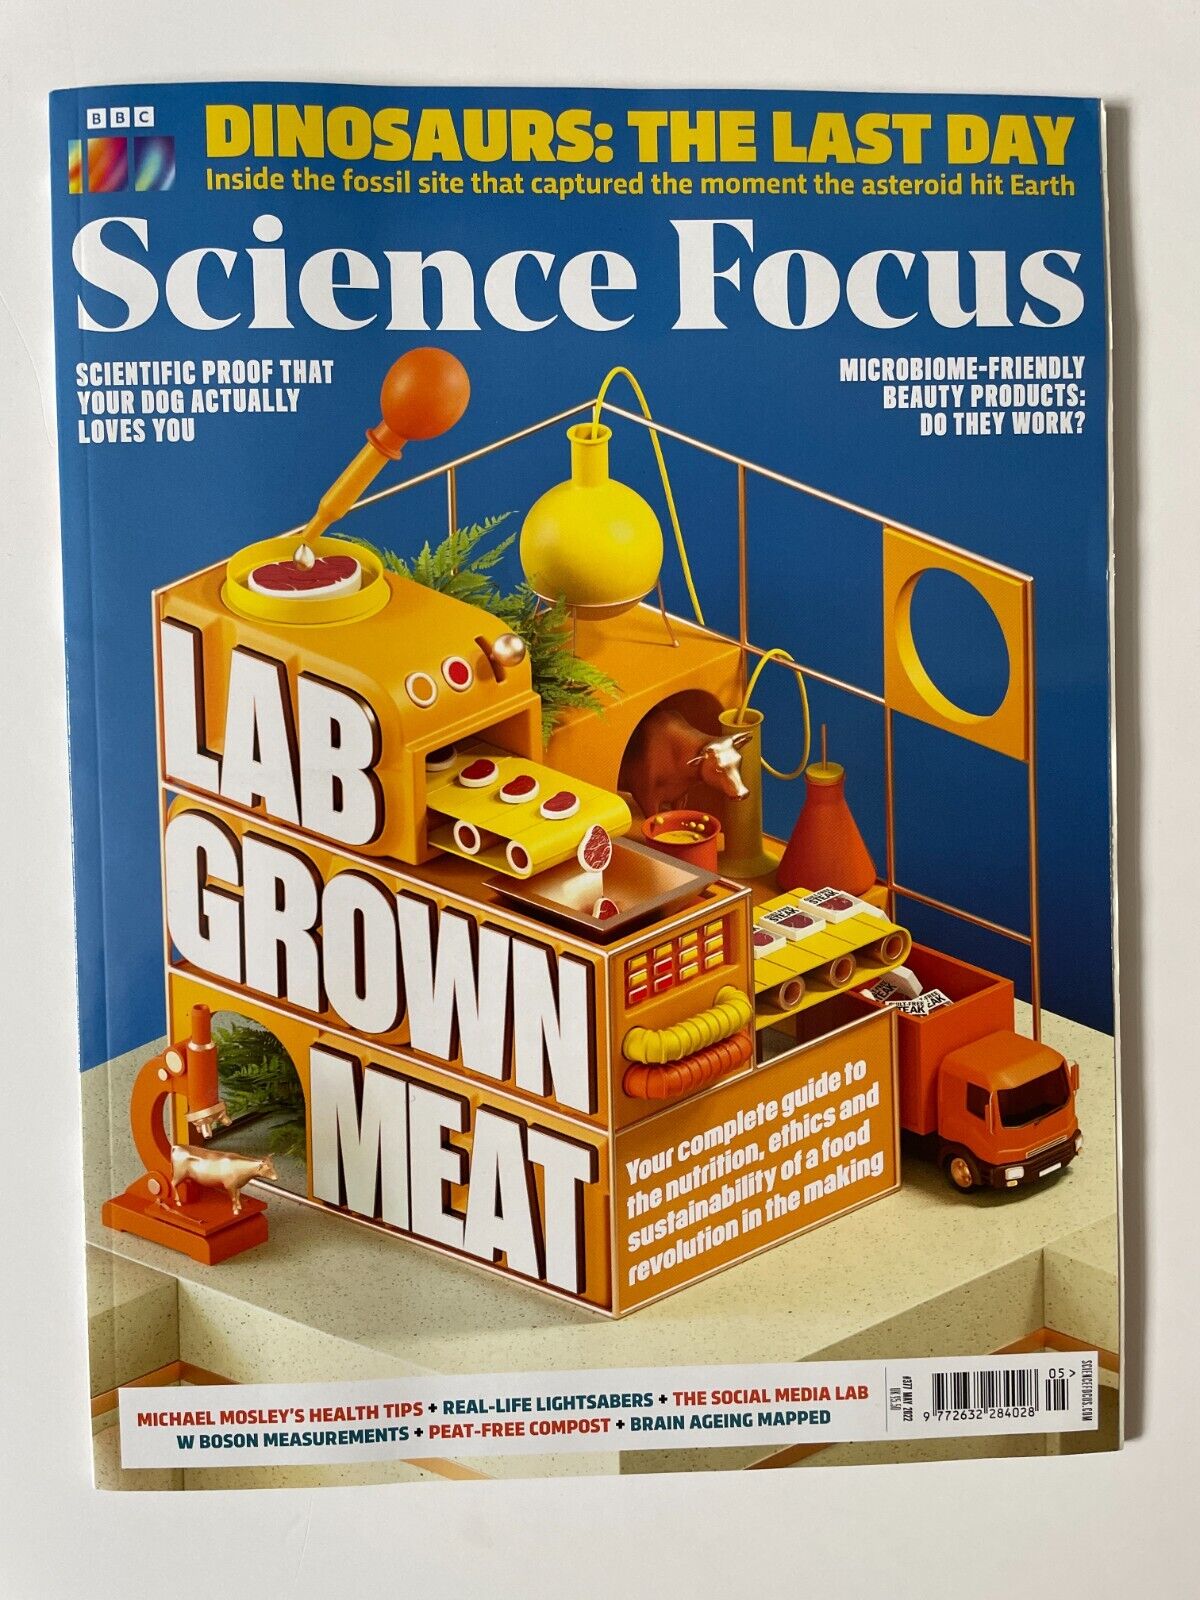 Science Focus May 2022 magazine back issue Science Focus magizine back copy Science Focus May 2022 Science Magazine Back Issue Published in the UK by the BBC and Immediate Media Company. Dinosaurs: the last day.